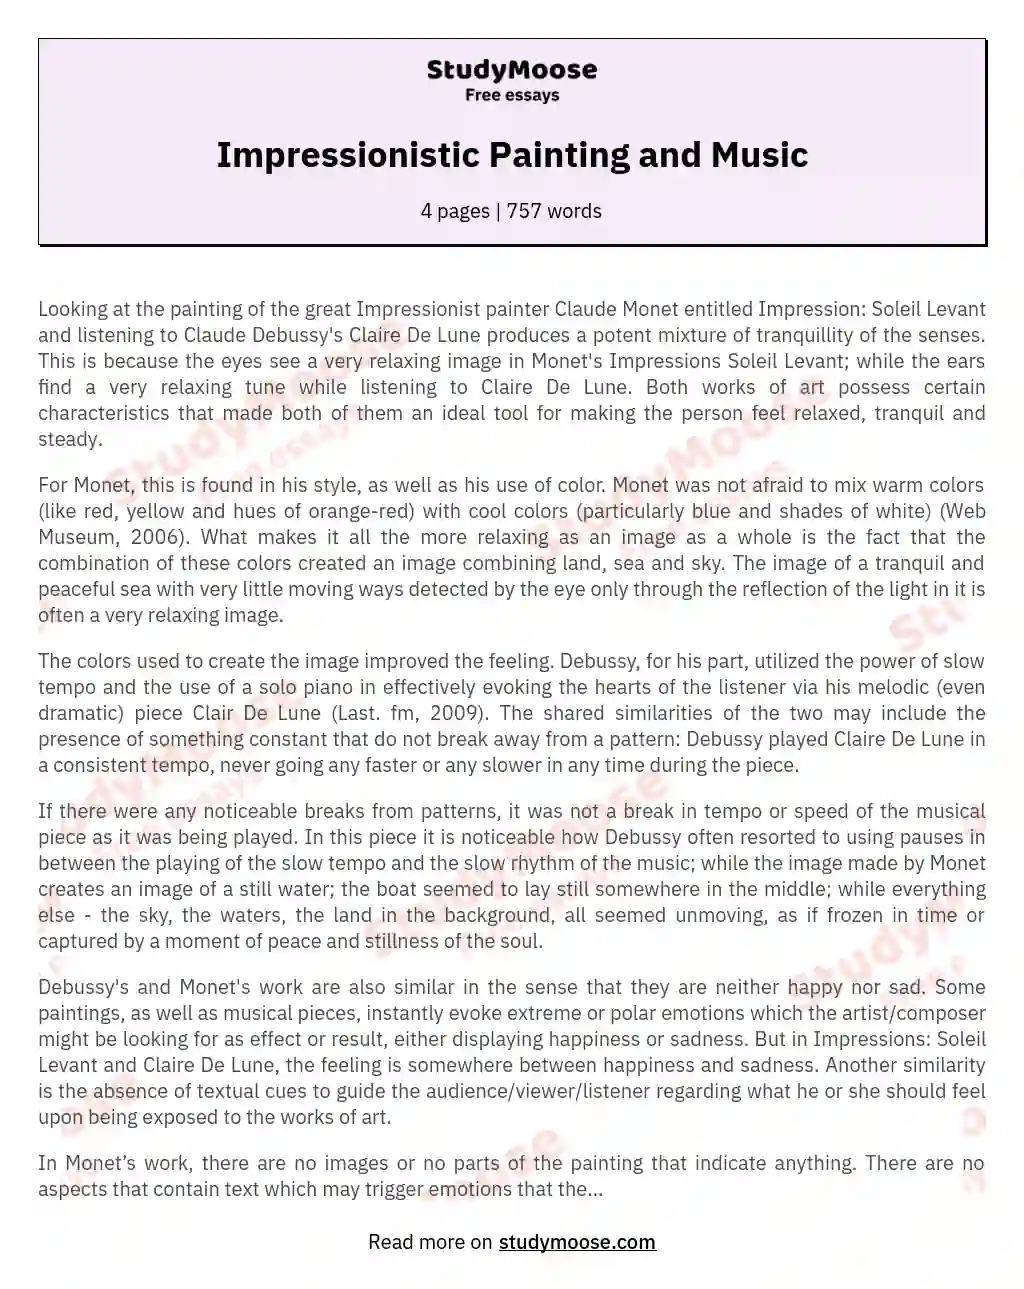 Impressionistic Painting and Music essay